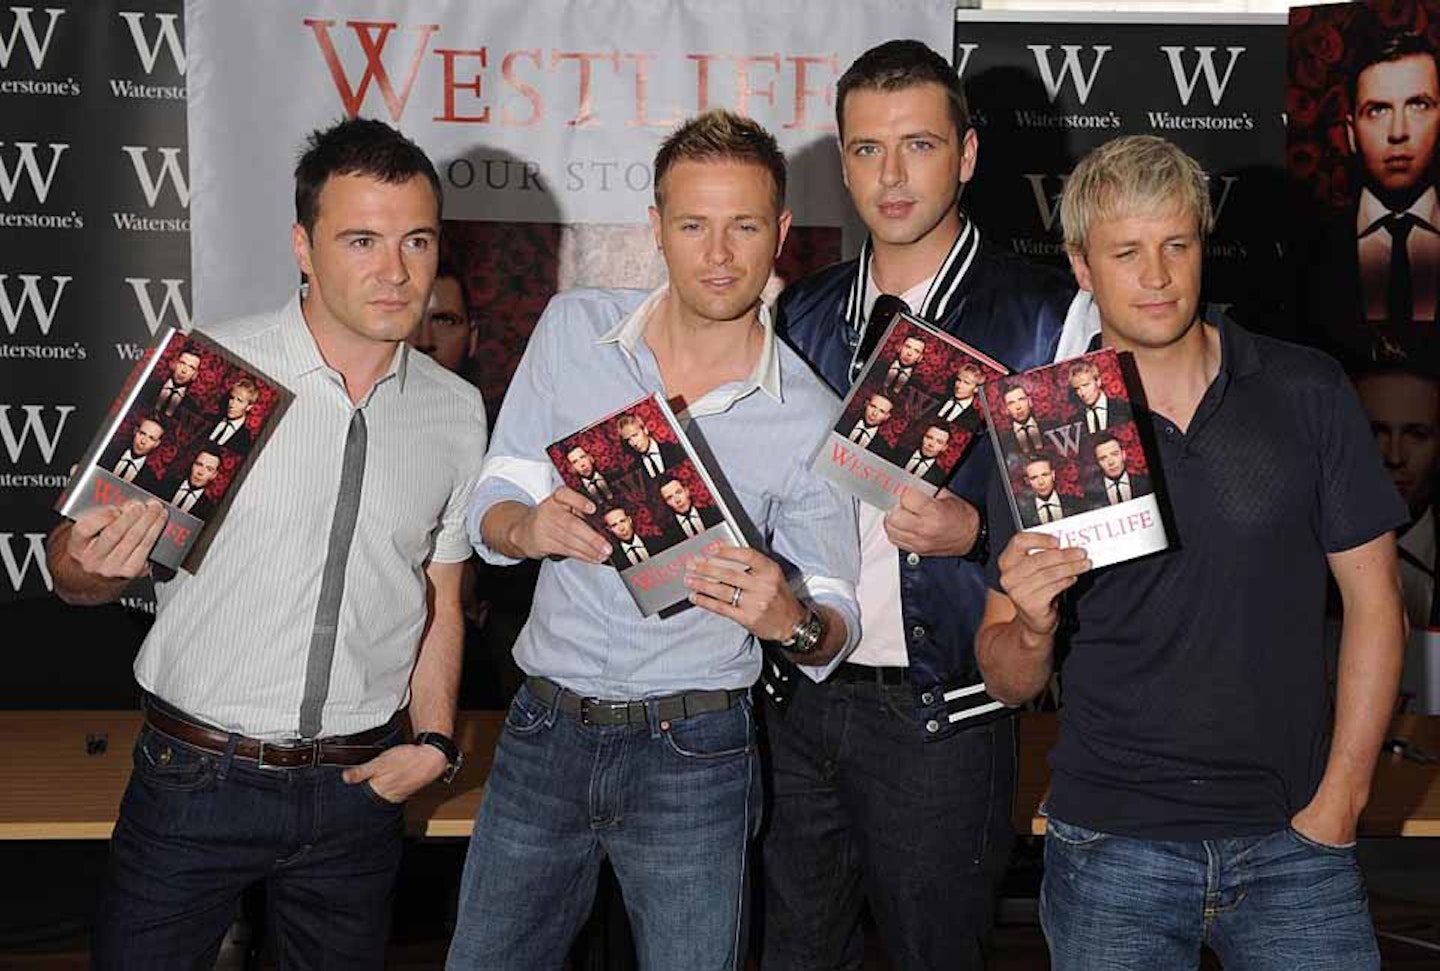 Westlife attend a book-signing at Waterstone's (2008)